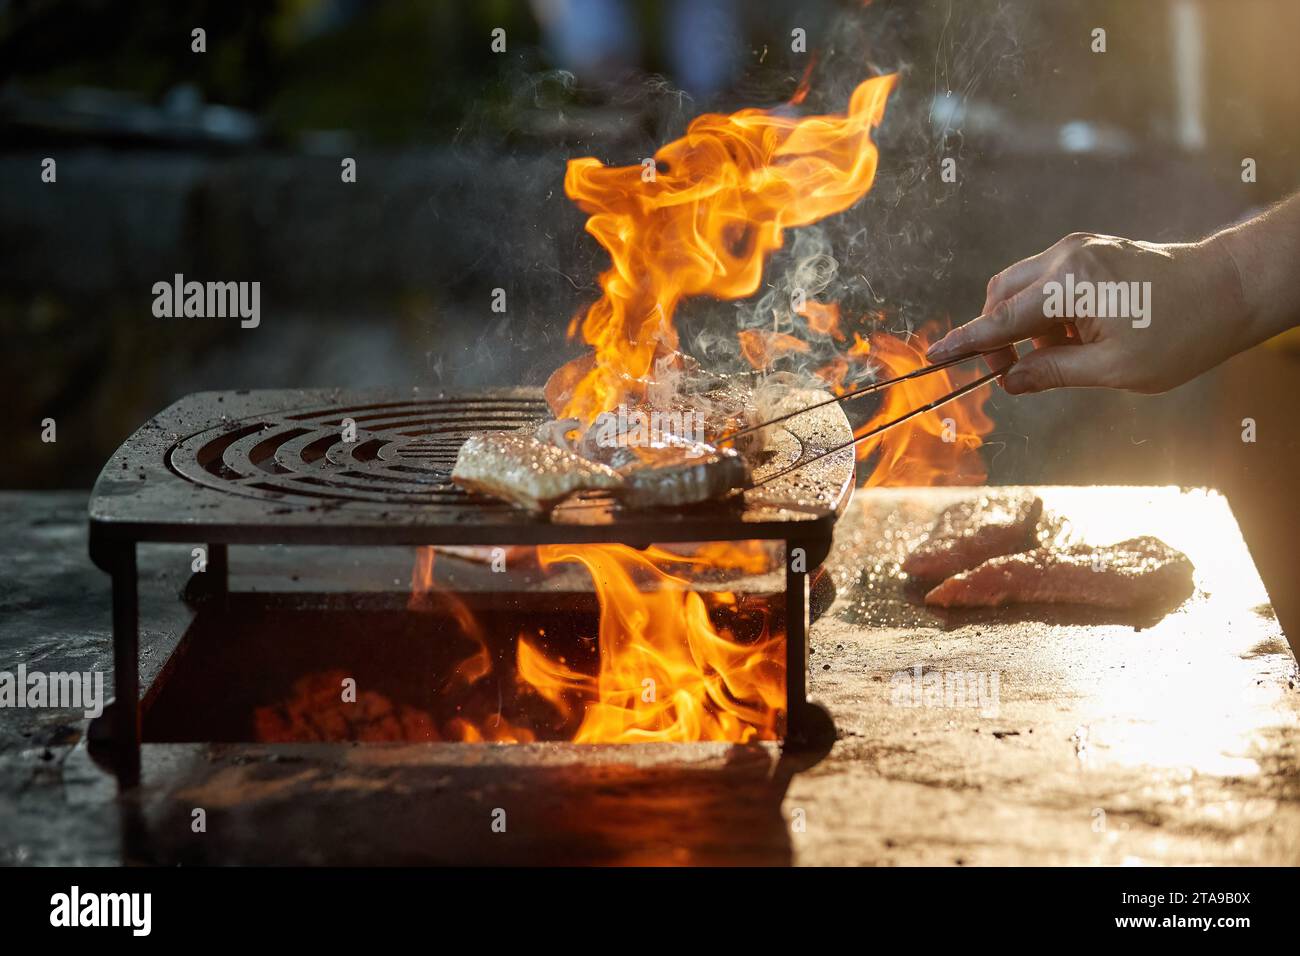 A chef prepares a steak on an outdoor grill. Close up of cooking at garden festival, flames, shallow depth of field, very colorful blurred background, Stock Photo